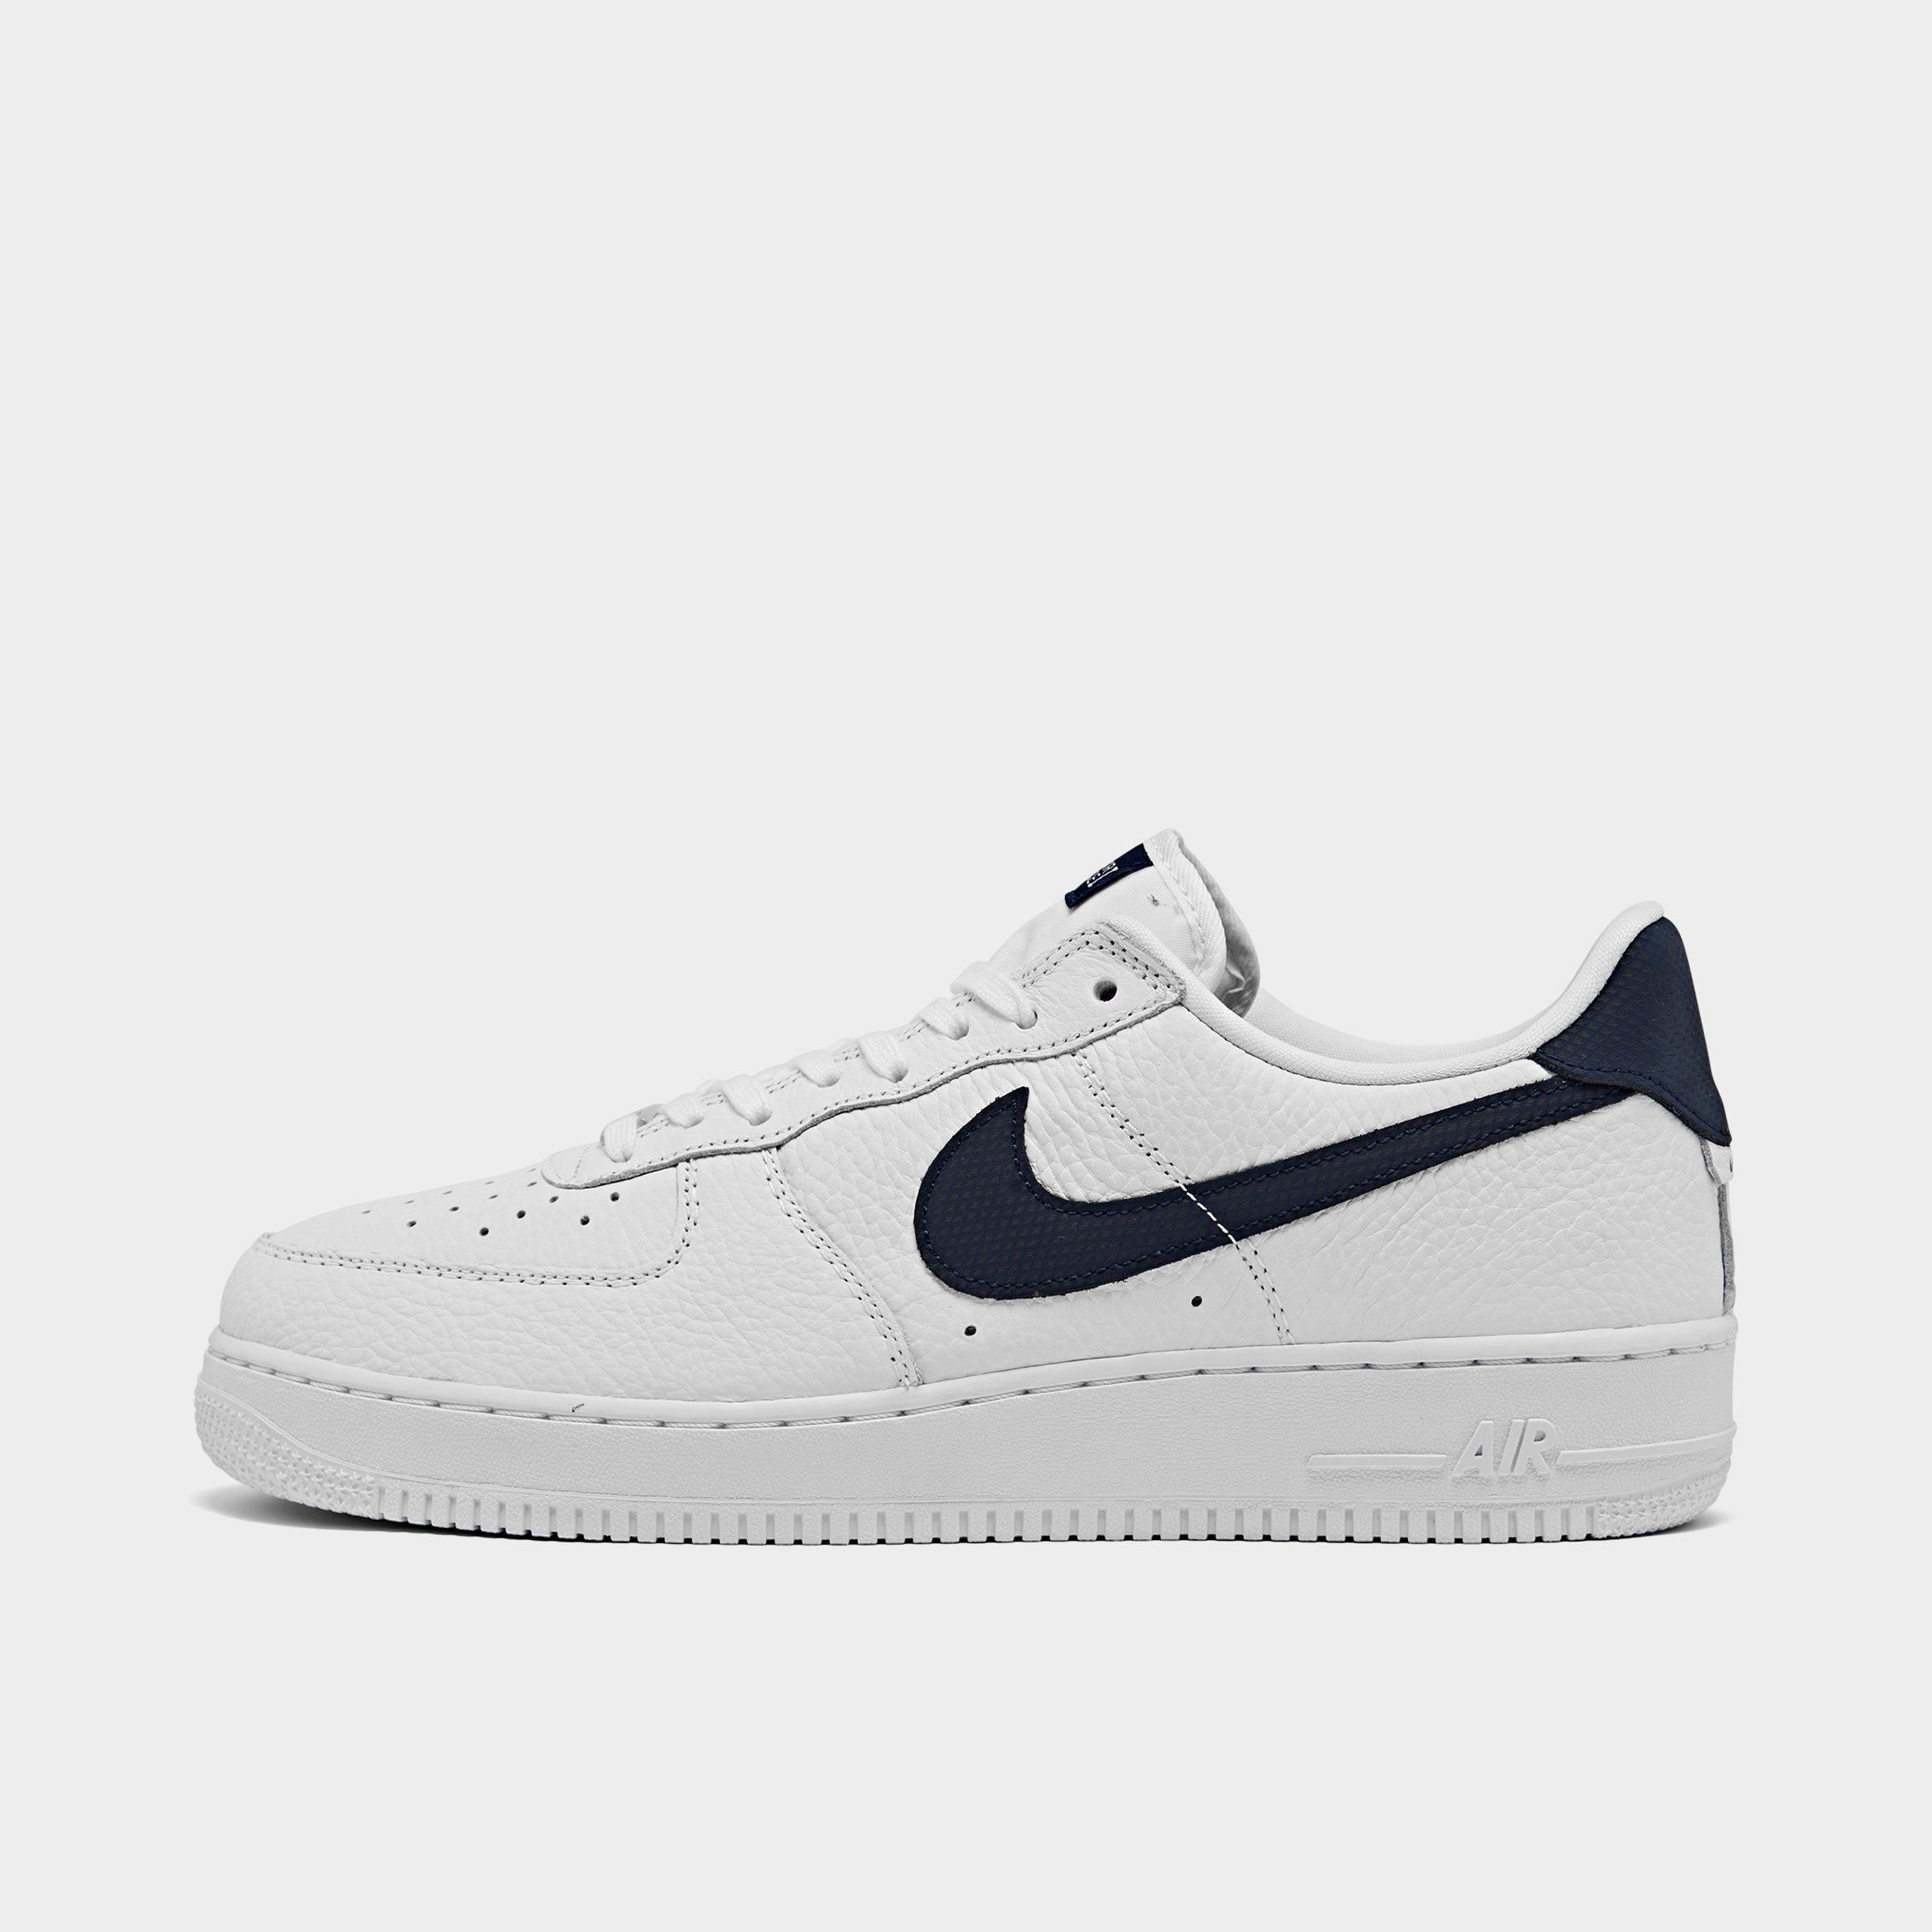 nike air force 1 black and white finish line